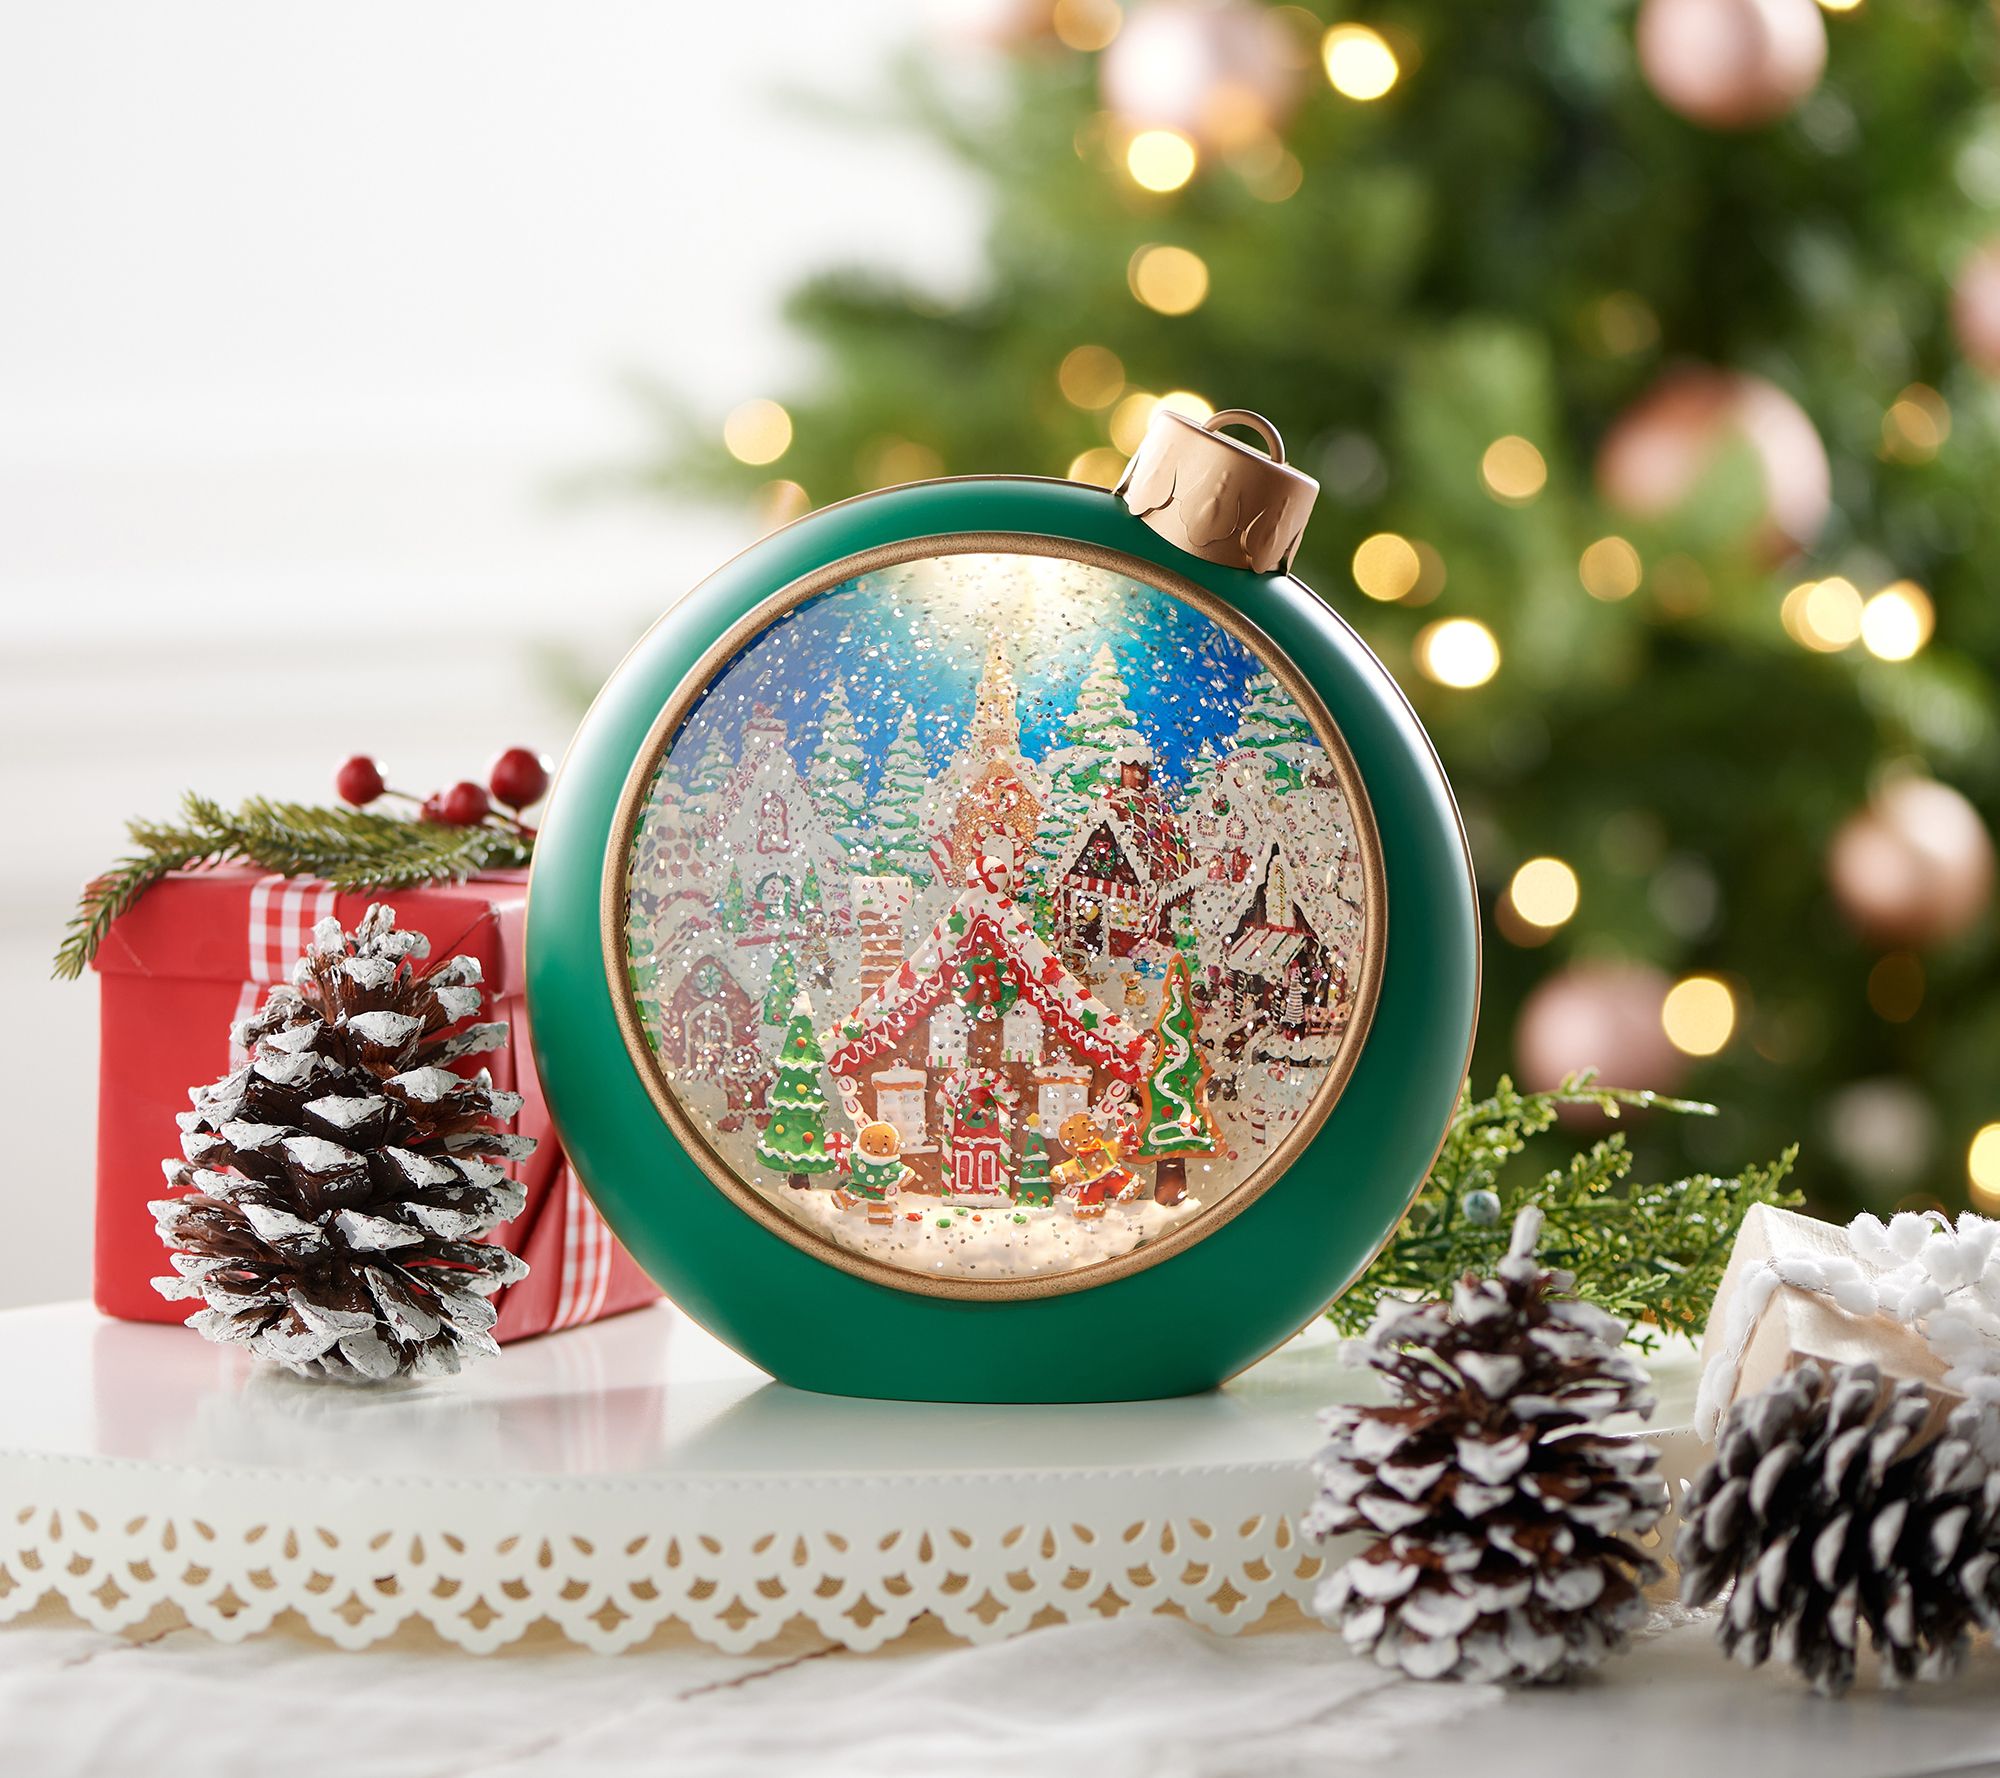 THIS IS A GREAT 8 PIECE CHRISTMAS WOODLAND SCENE 